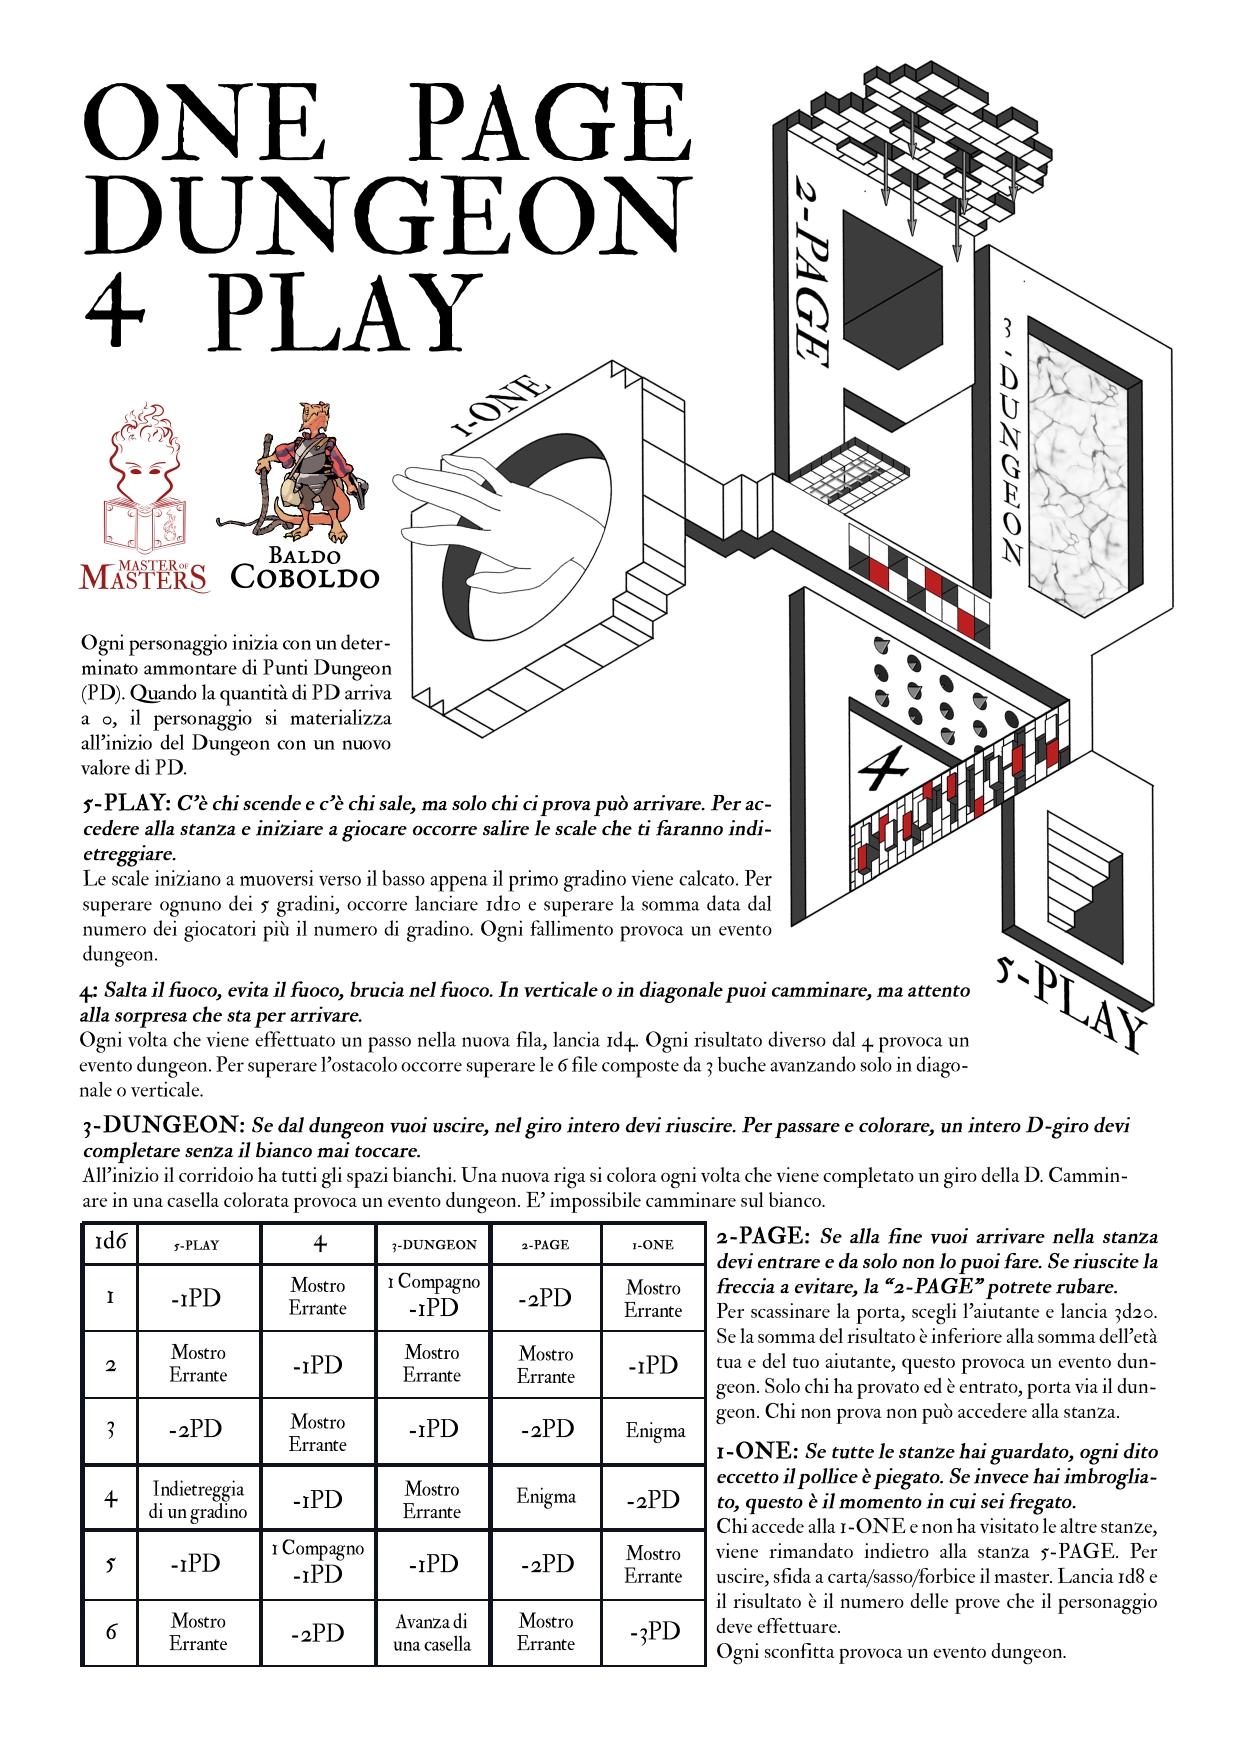 One Page Dungeon 4 Play 2022 - Andrea Rossi aka Master of Masters